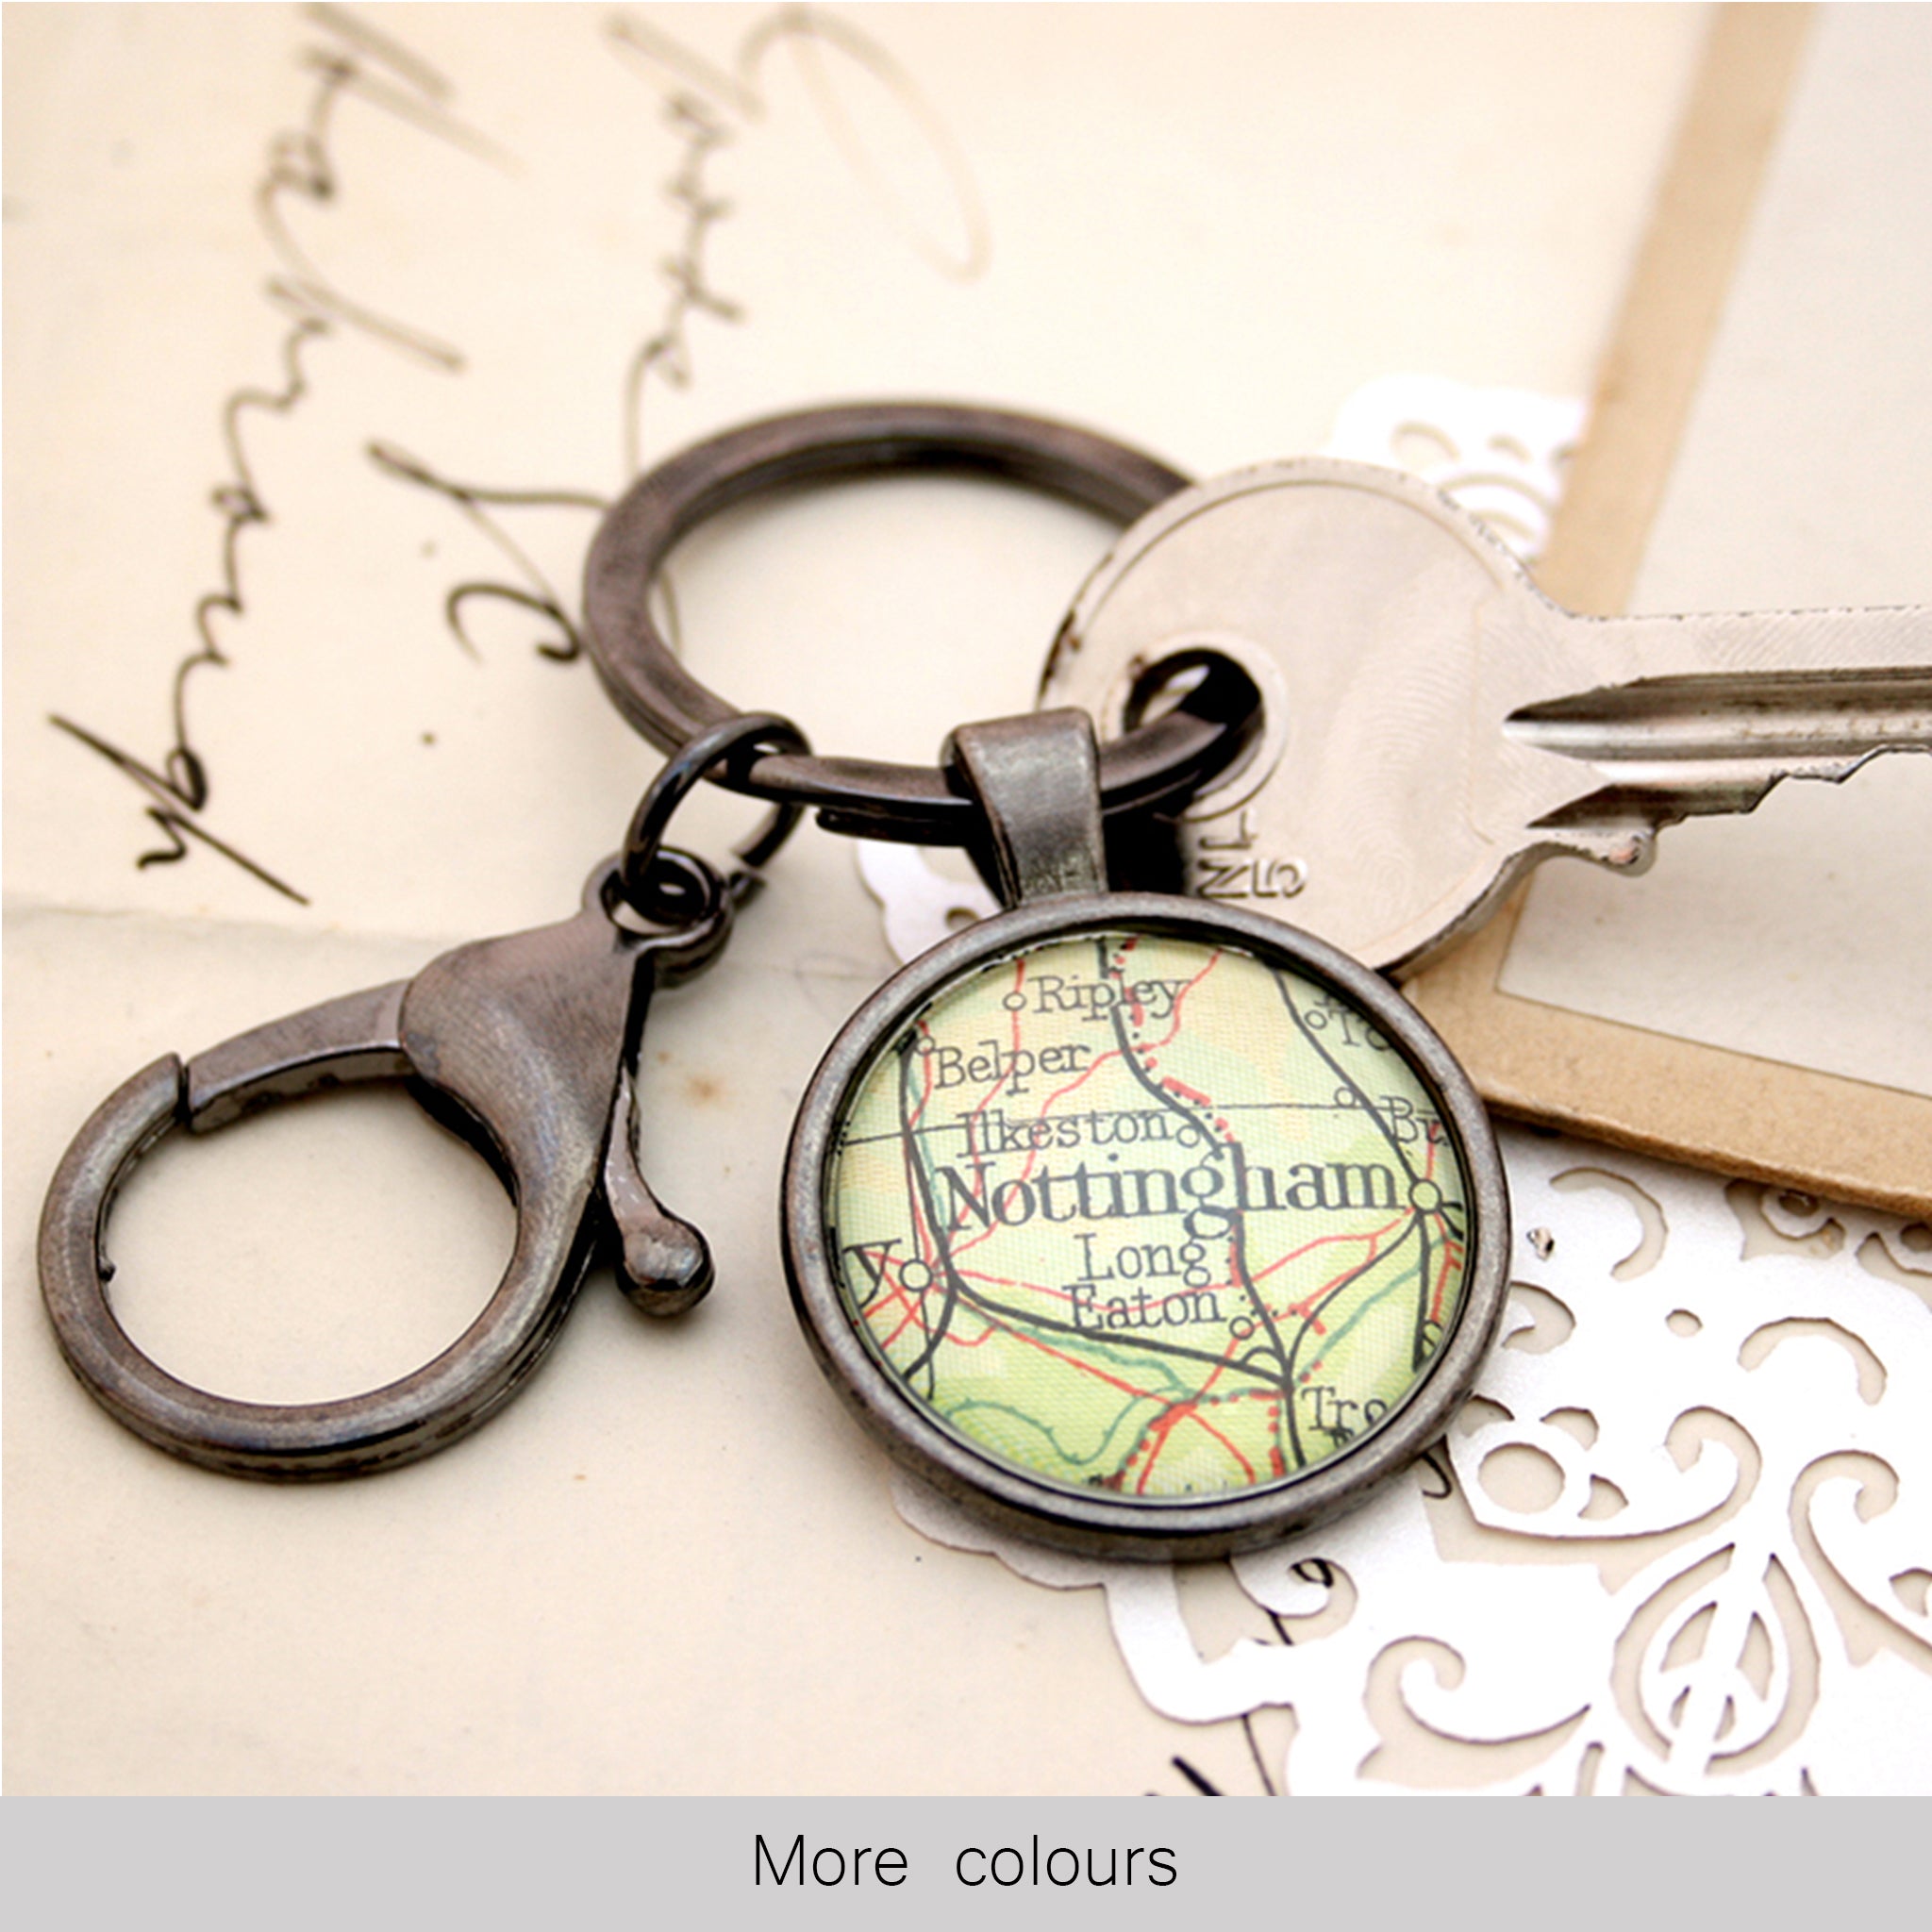 Personalised keyring in gunmetal black color featuring map of Nottingham